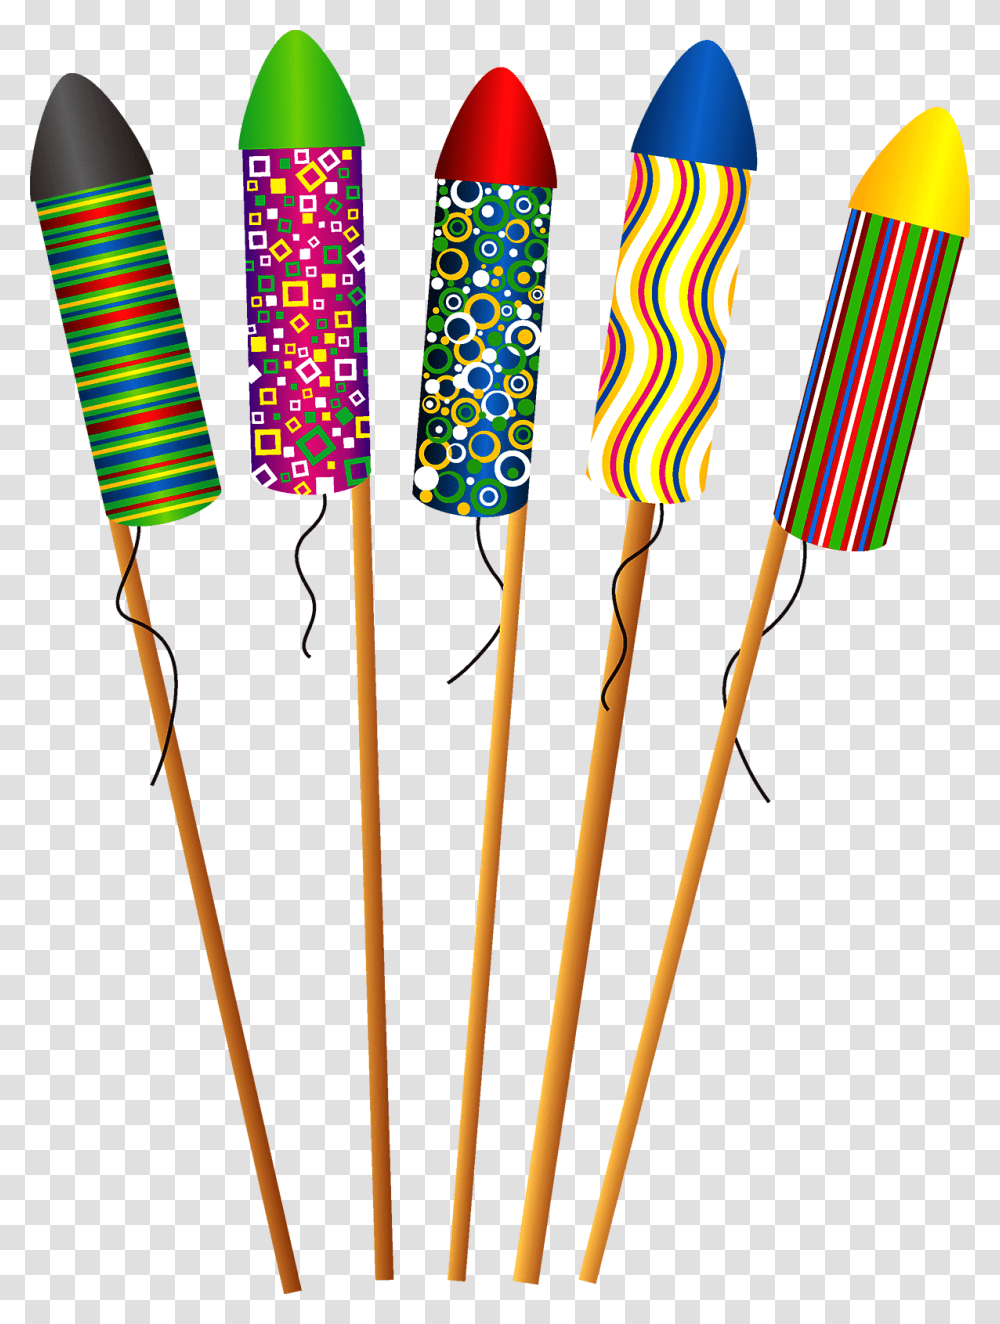 Diwali Crackers Image Firecrackers, Gold Transparent Png